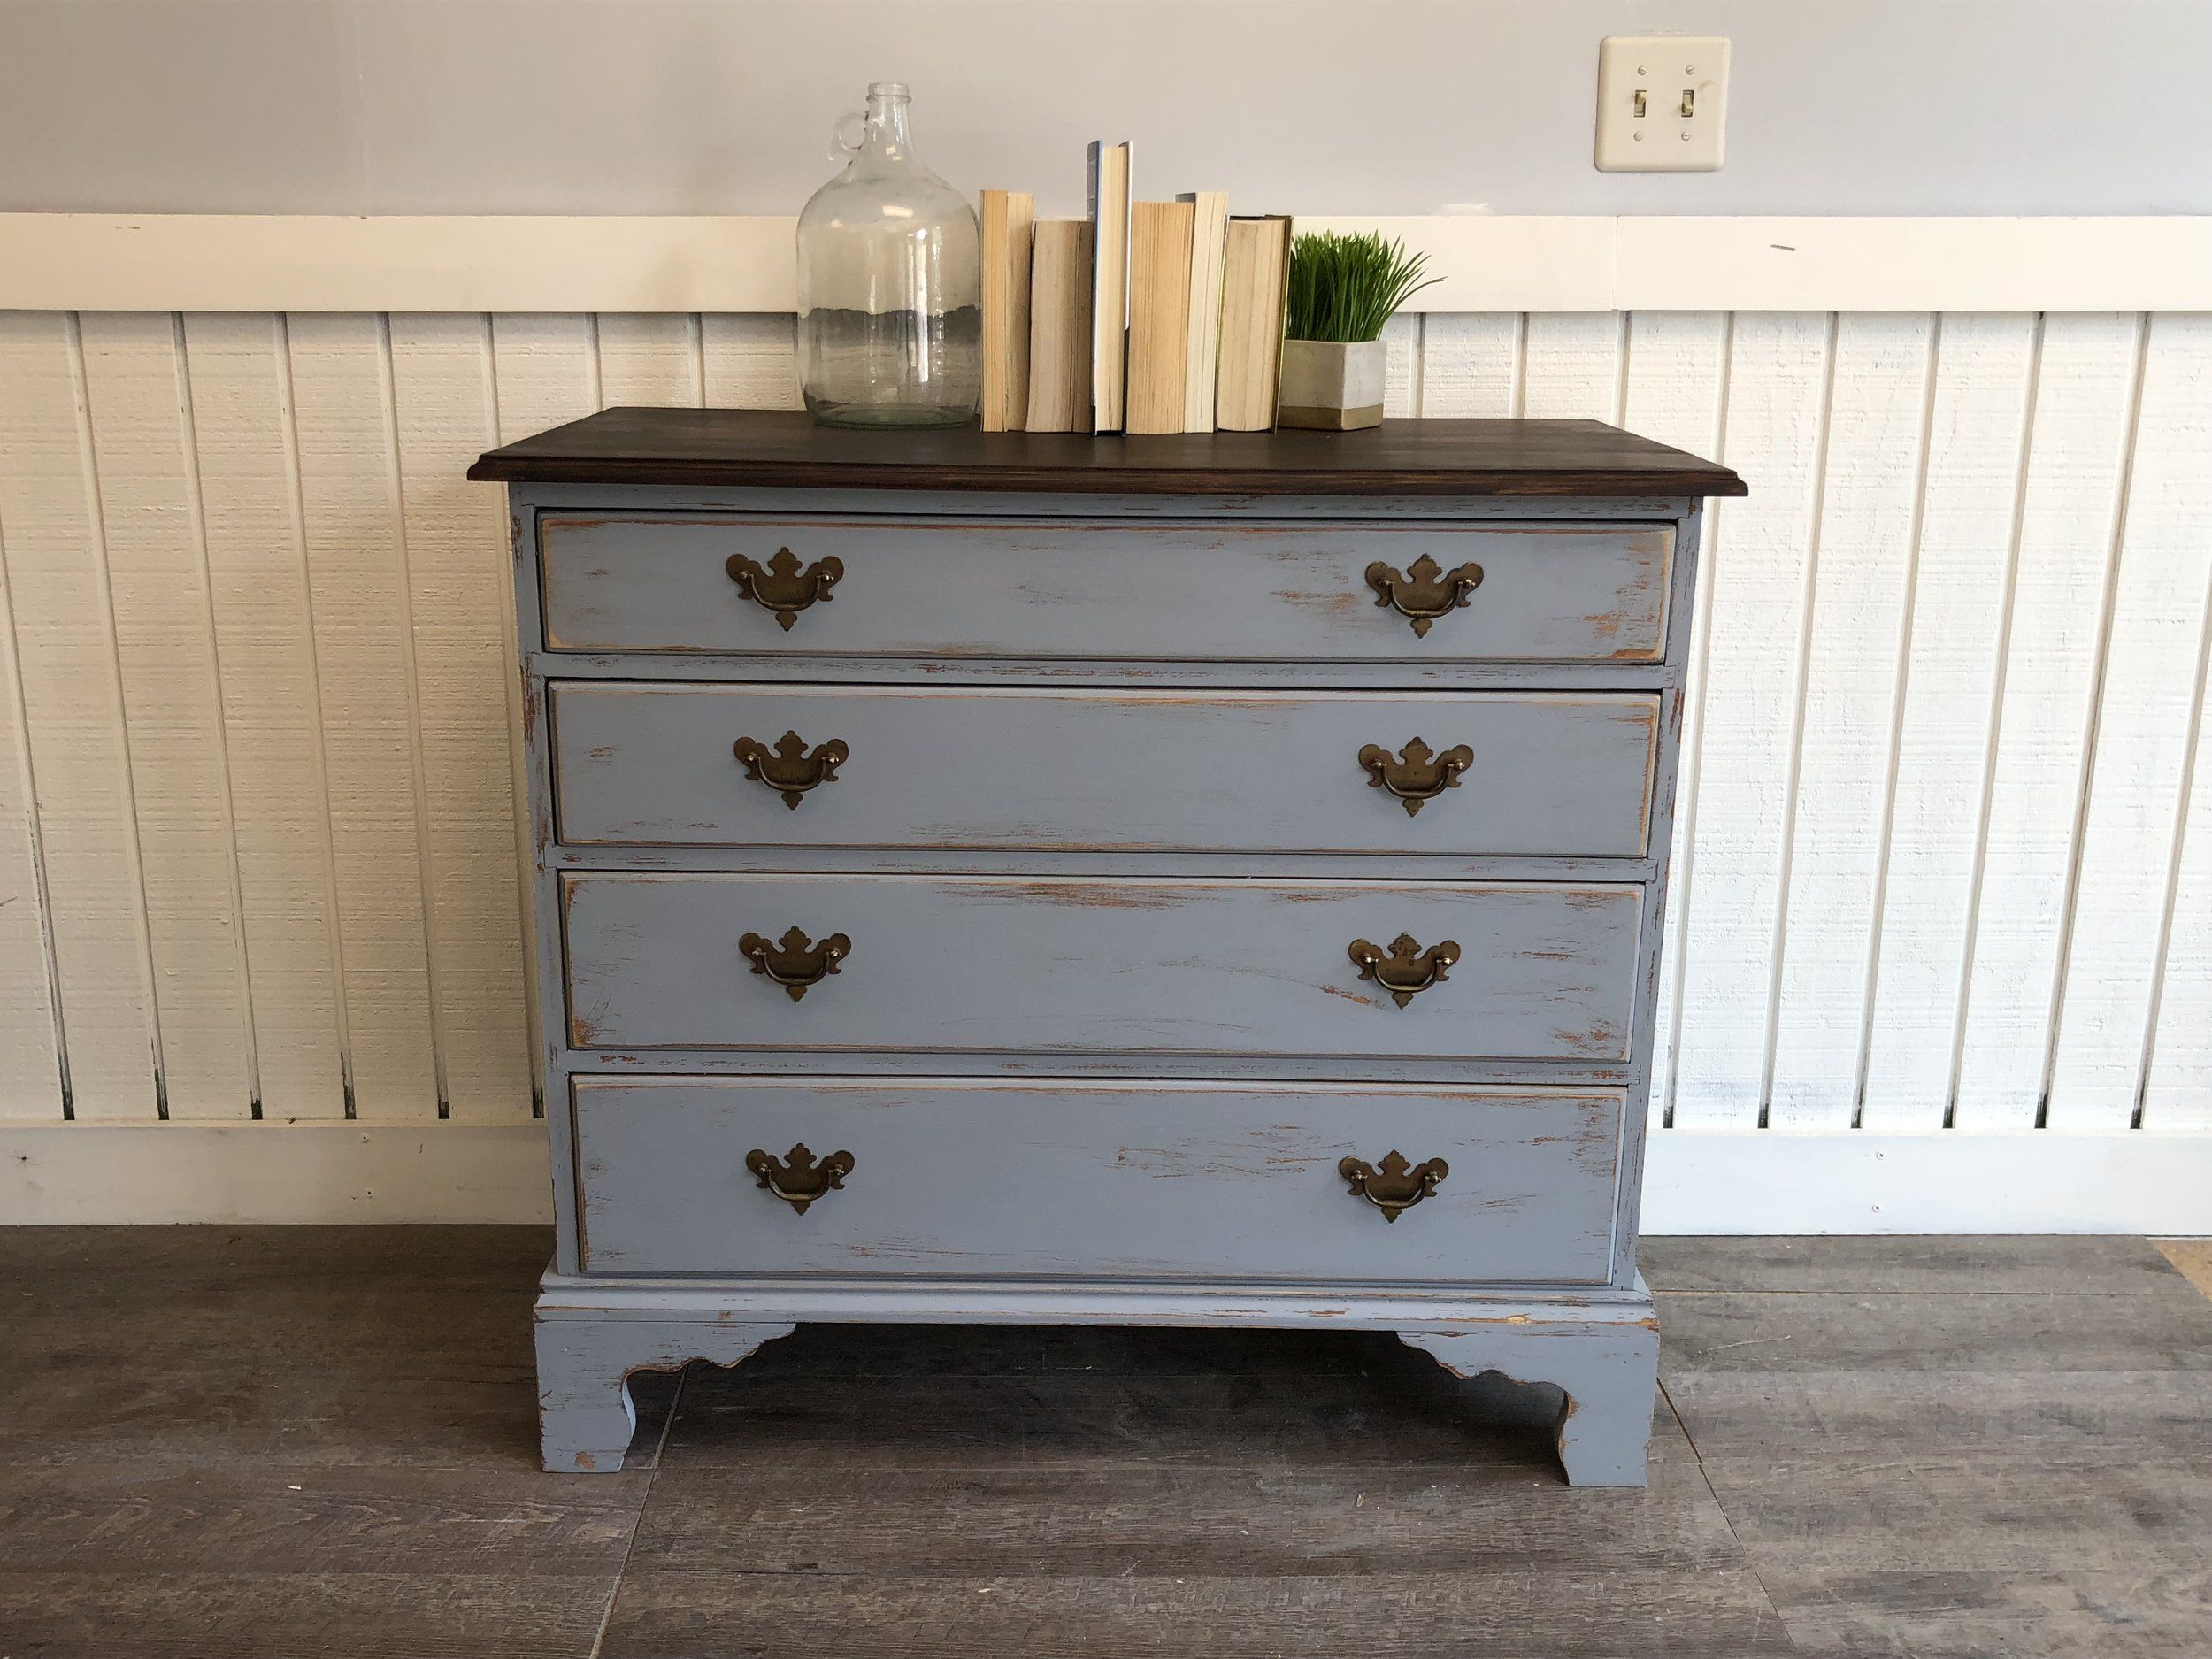 How To Paint A Dresser Shabby Chic 2021